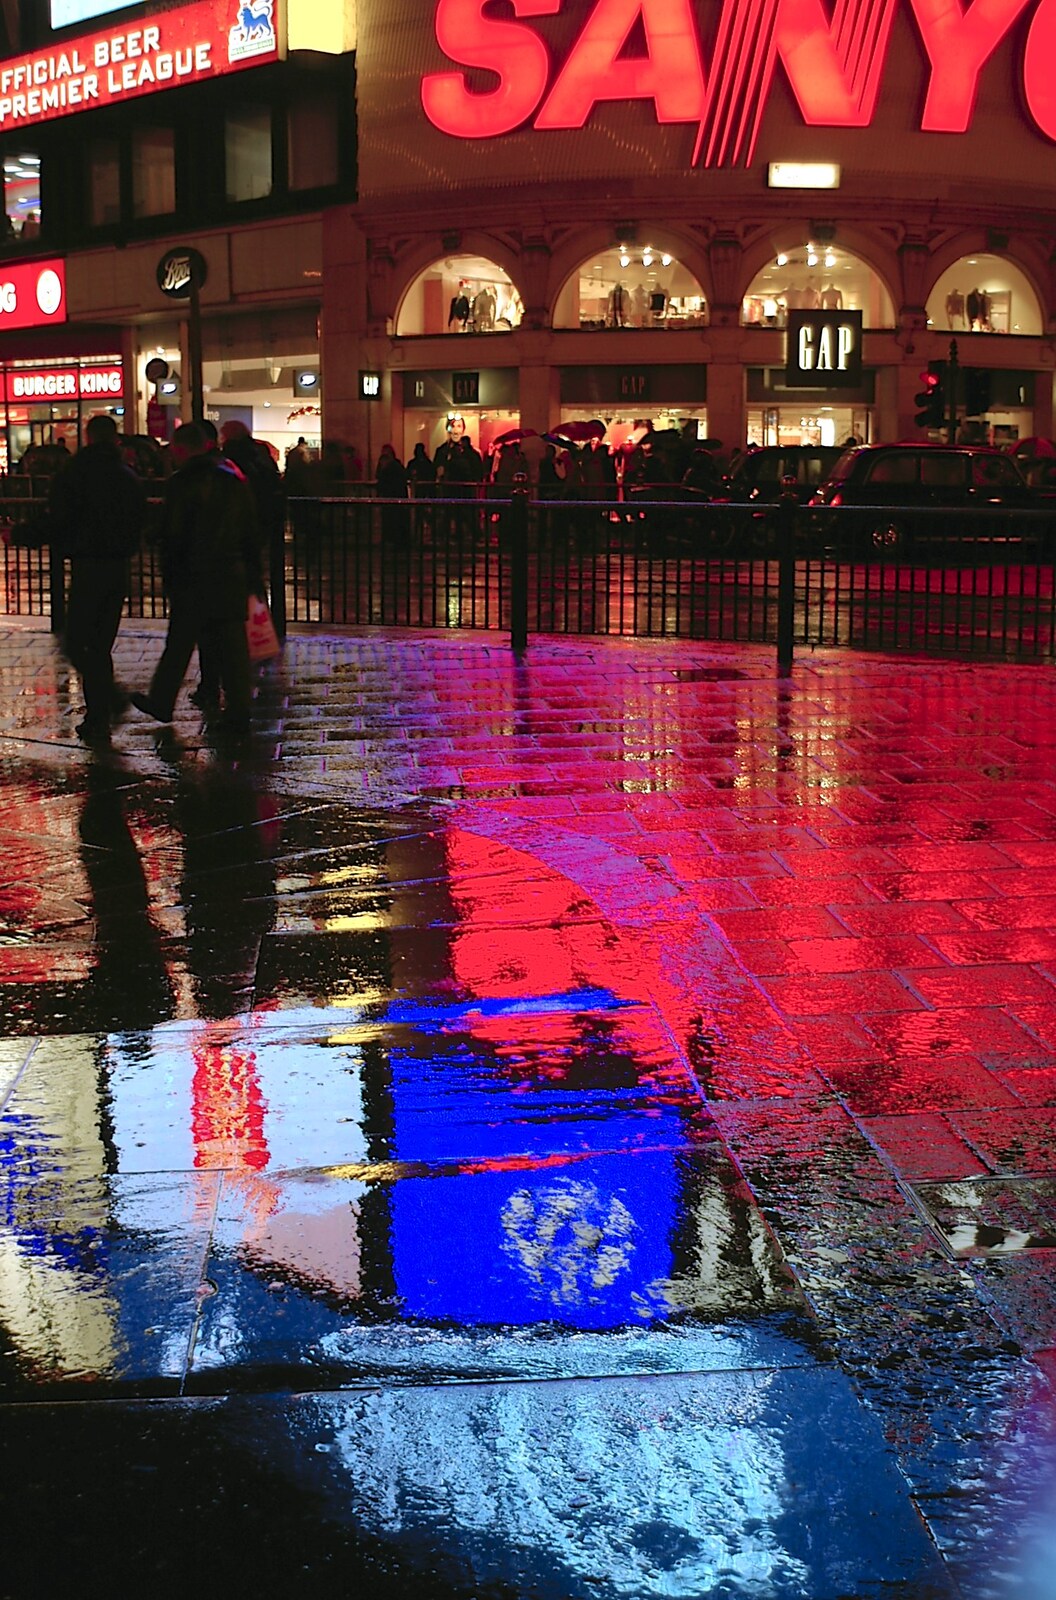 More lights on wet paving slabs from London in the Rain - 18th November 2004